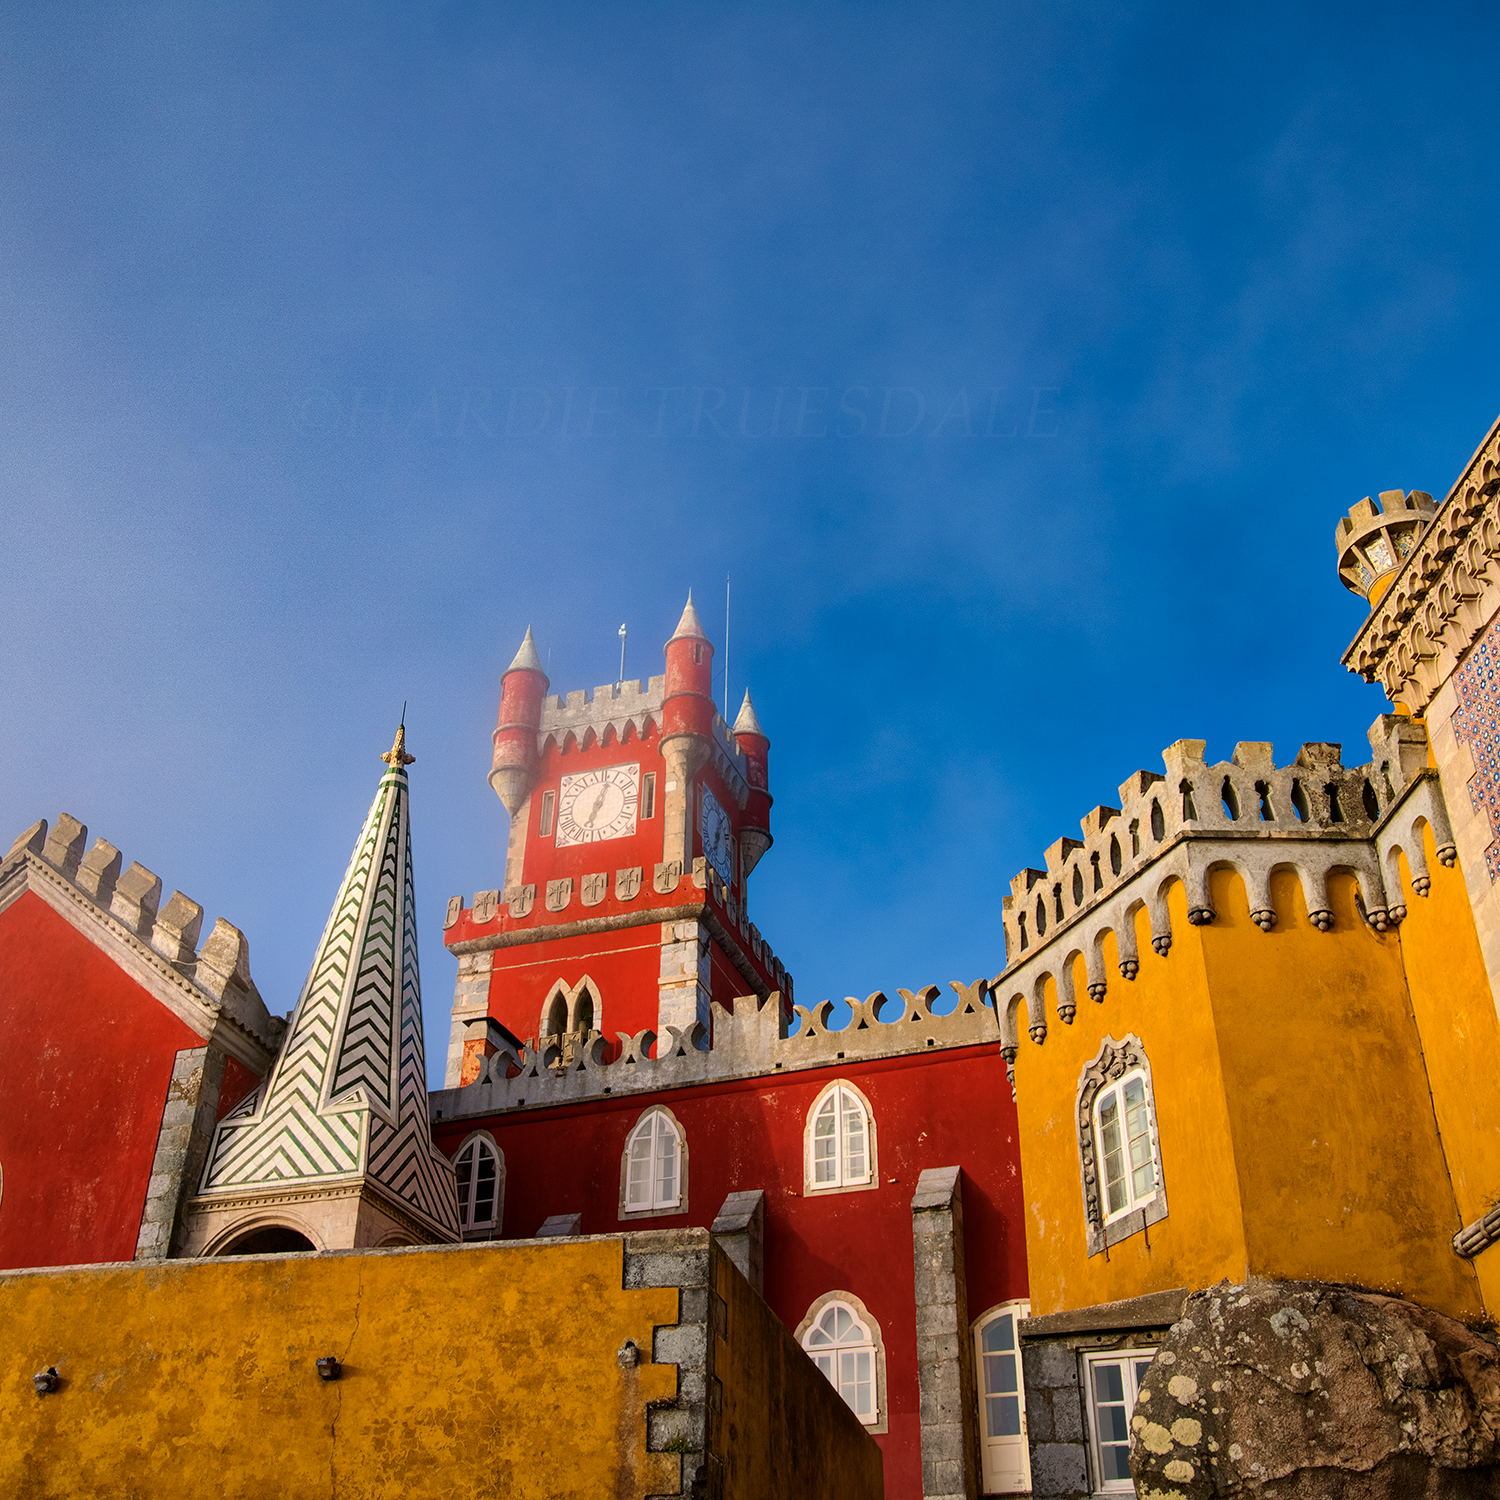 PT#022 "Colorful Towers" Pena Palace, Sintra